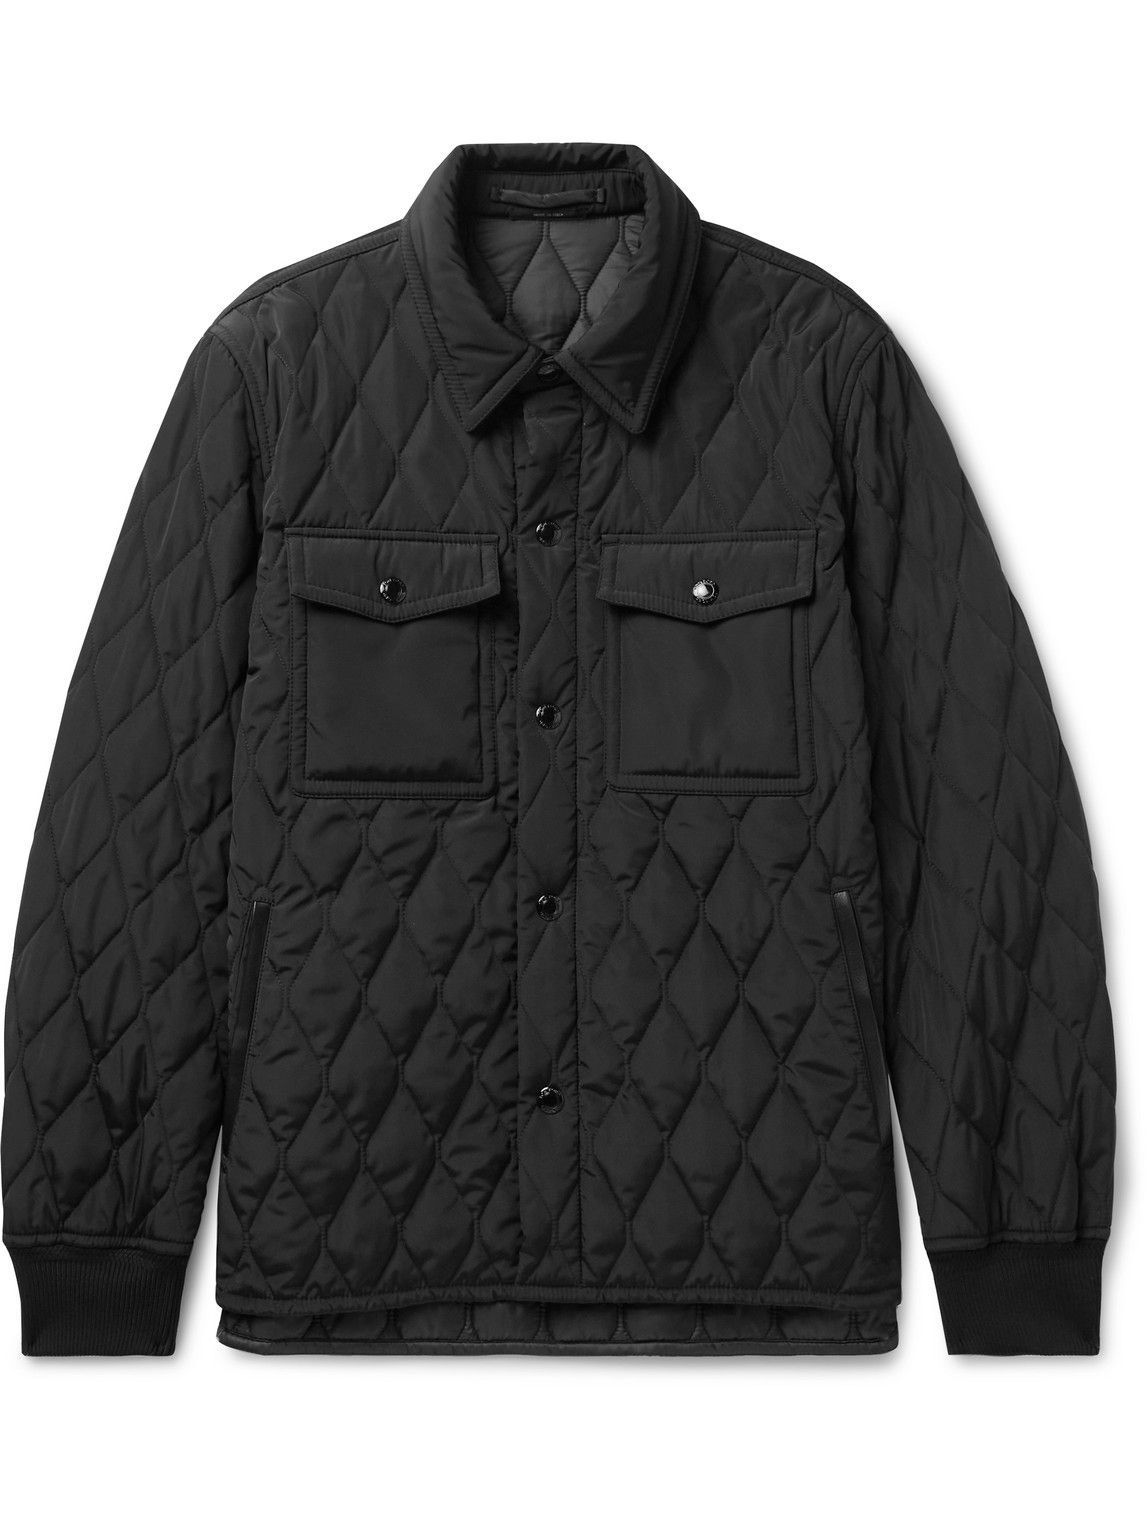 TOM FORD - Leather-Trimmed Quilted Shell Jacket - Black TOM FORD